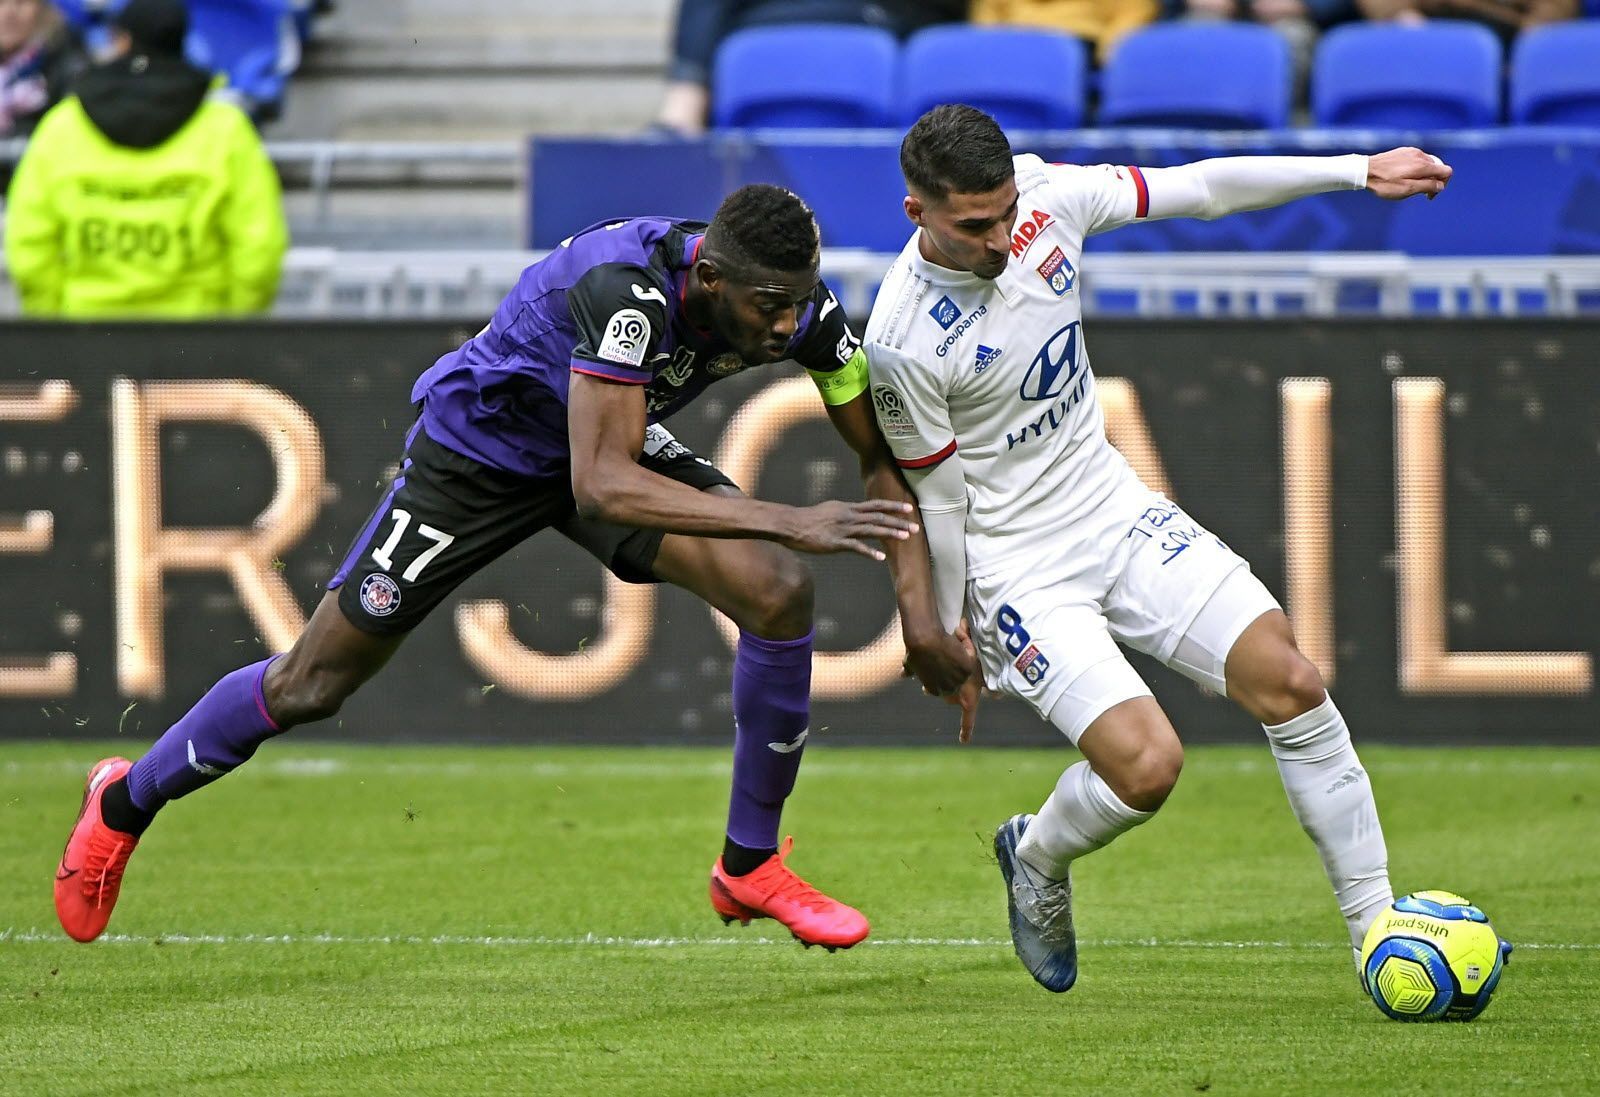 Lyon and Toulouse will meet in Ligue 1 on Friday